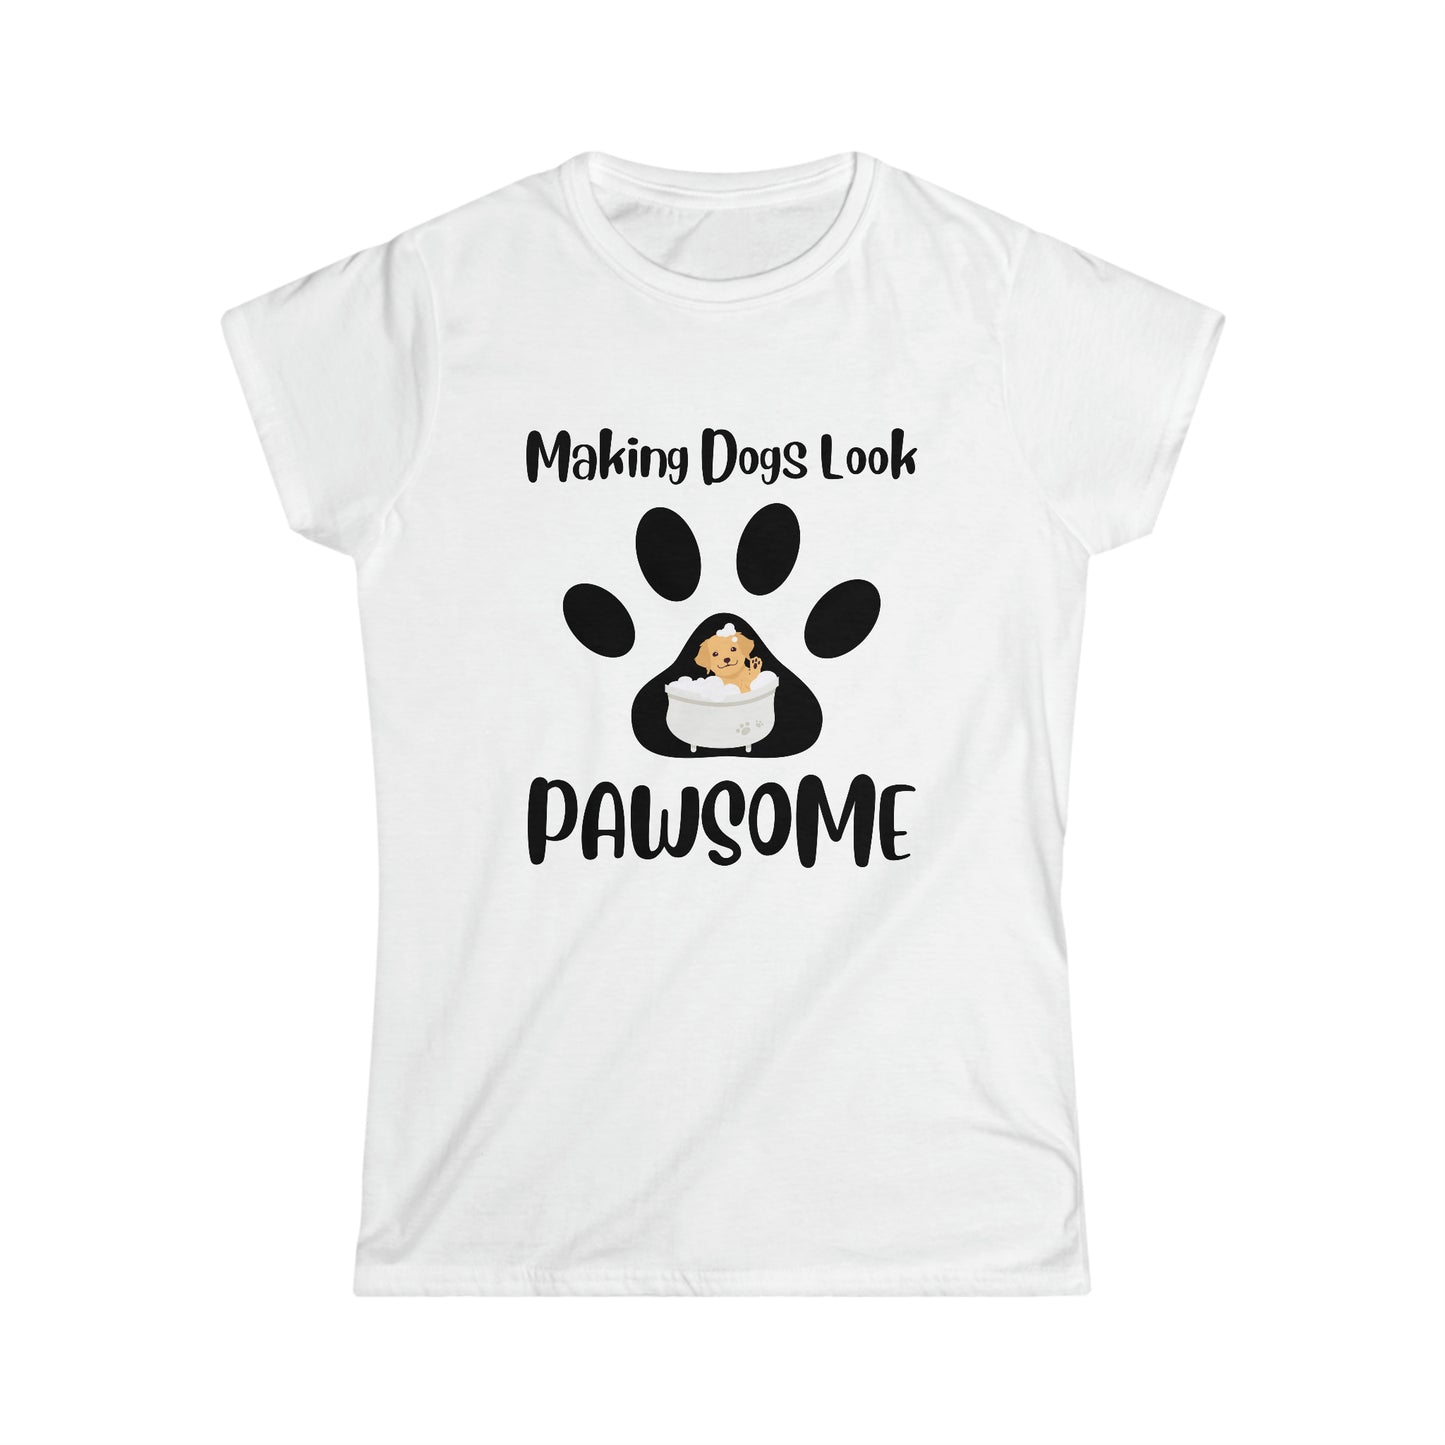 Making Dogs Look Pawsome, Dog Groomer Apparel. Women's Softstyle Tee